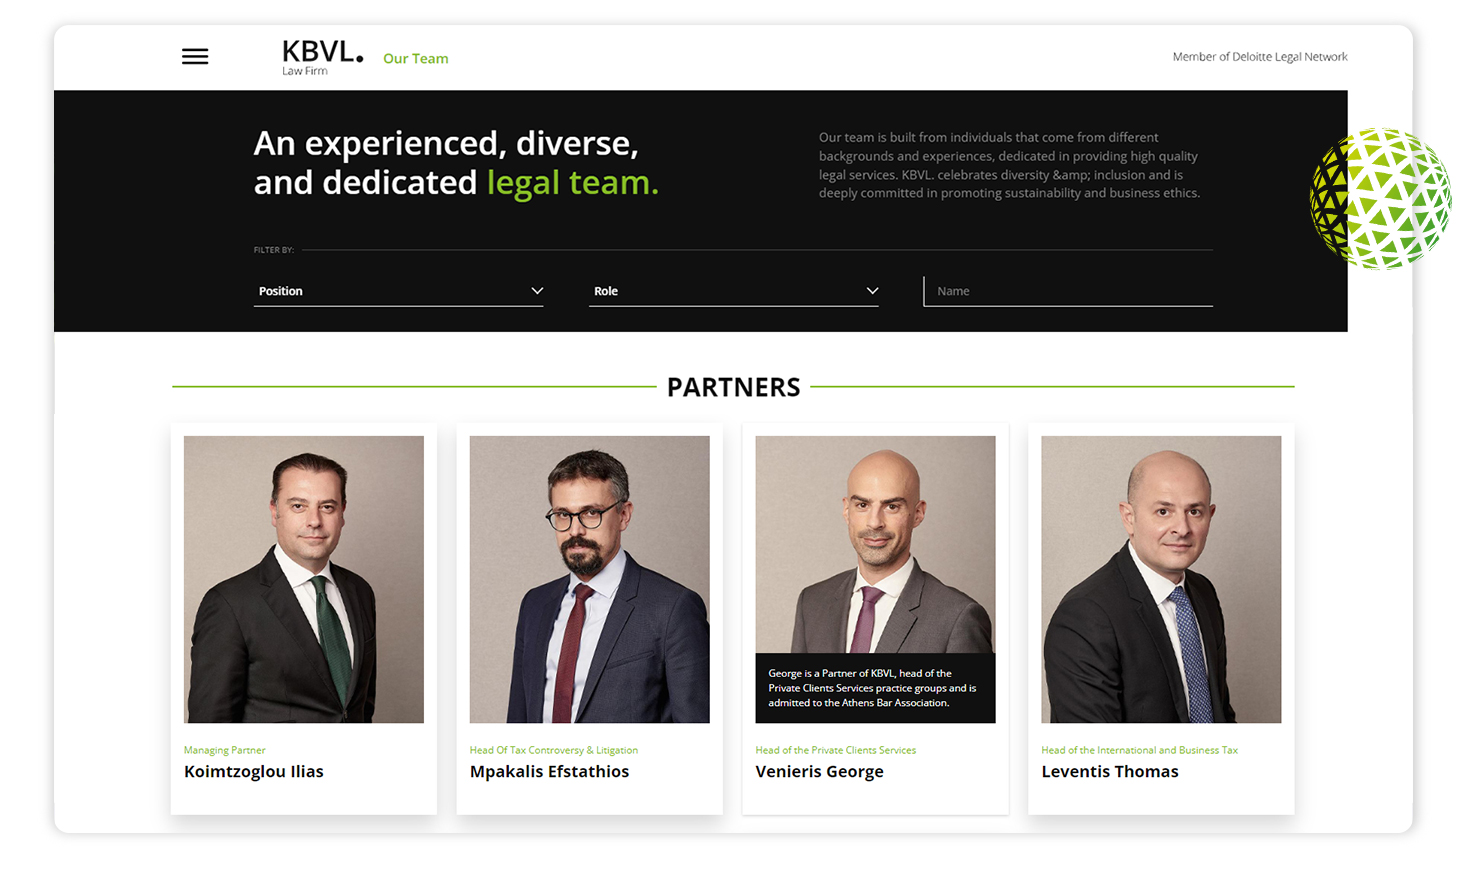 The partners page WEB DESIGN